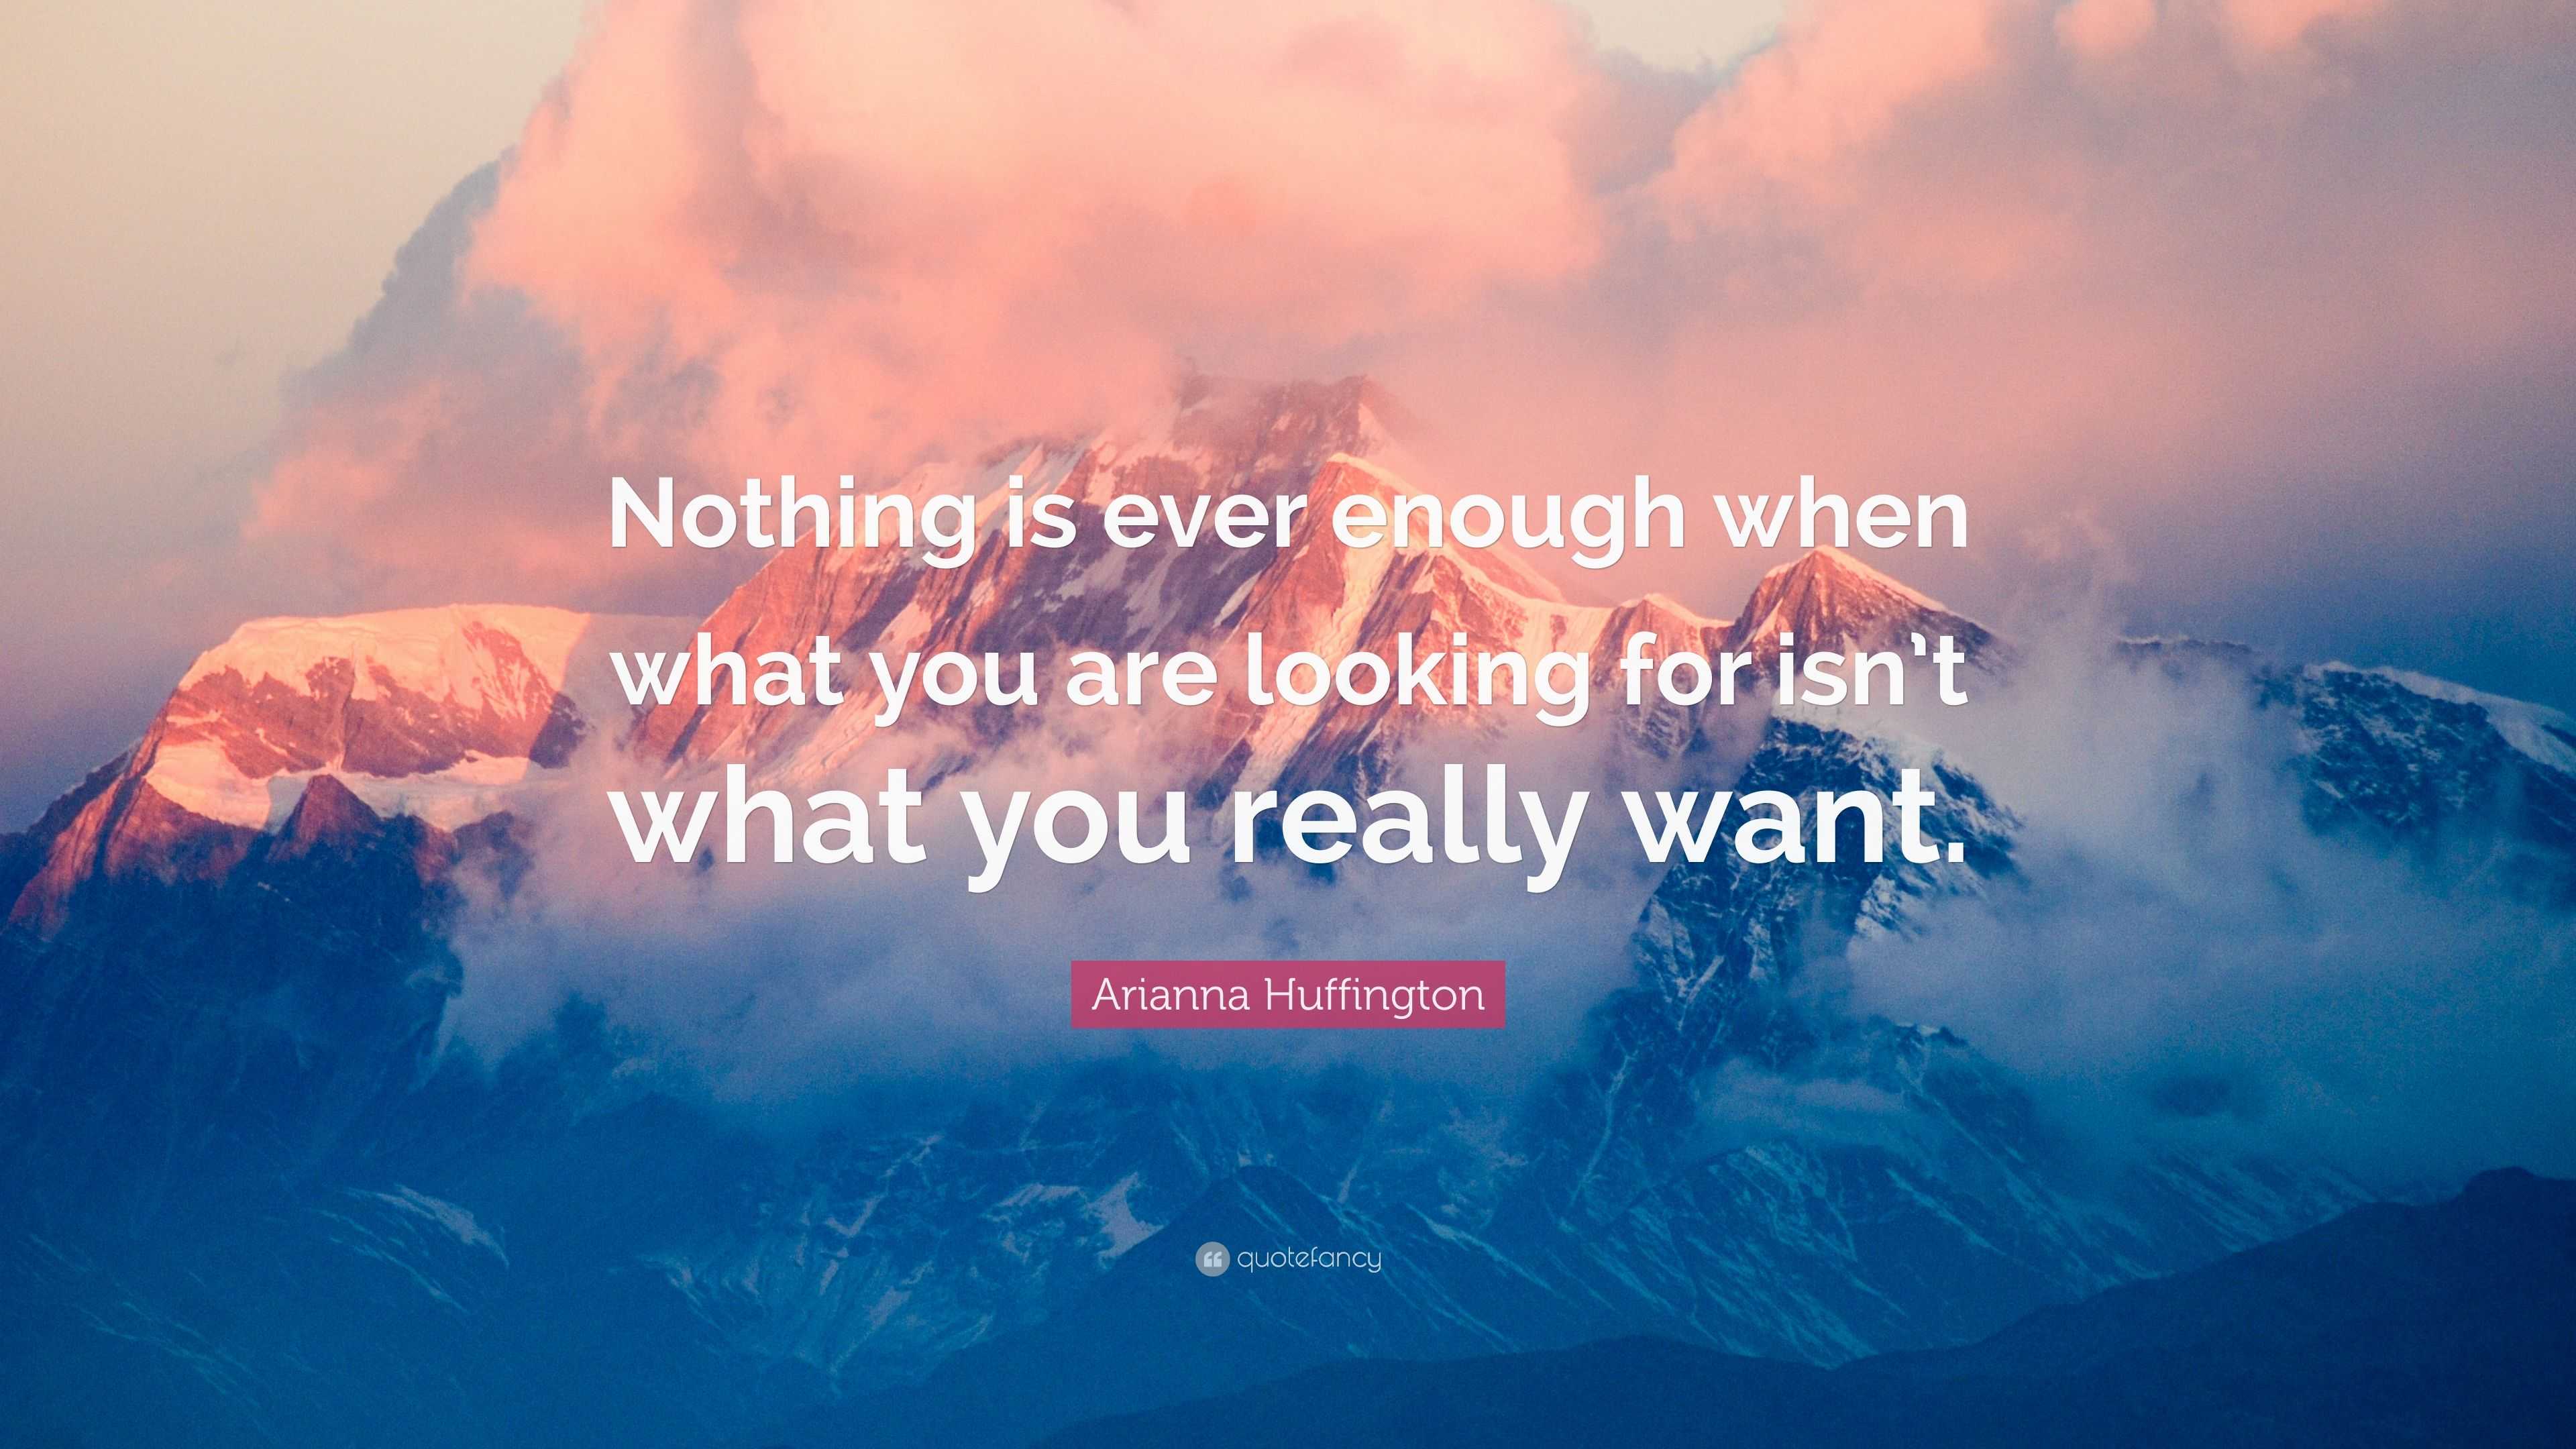 Arianna Huffington Quote: “Nothing is ever enough when what you are ...